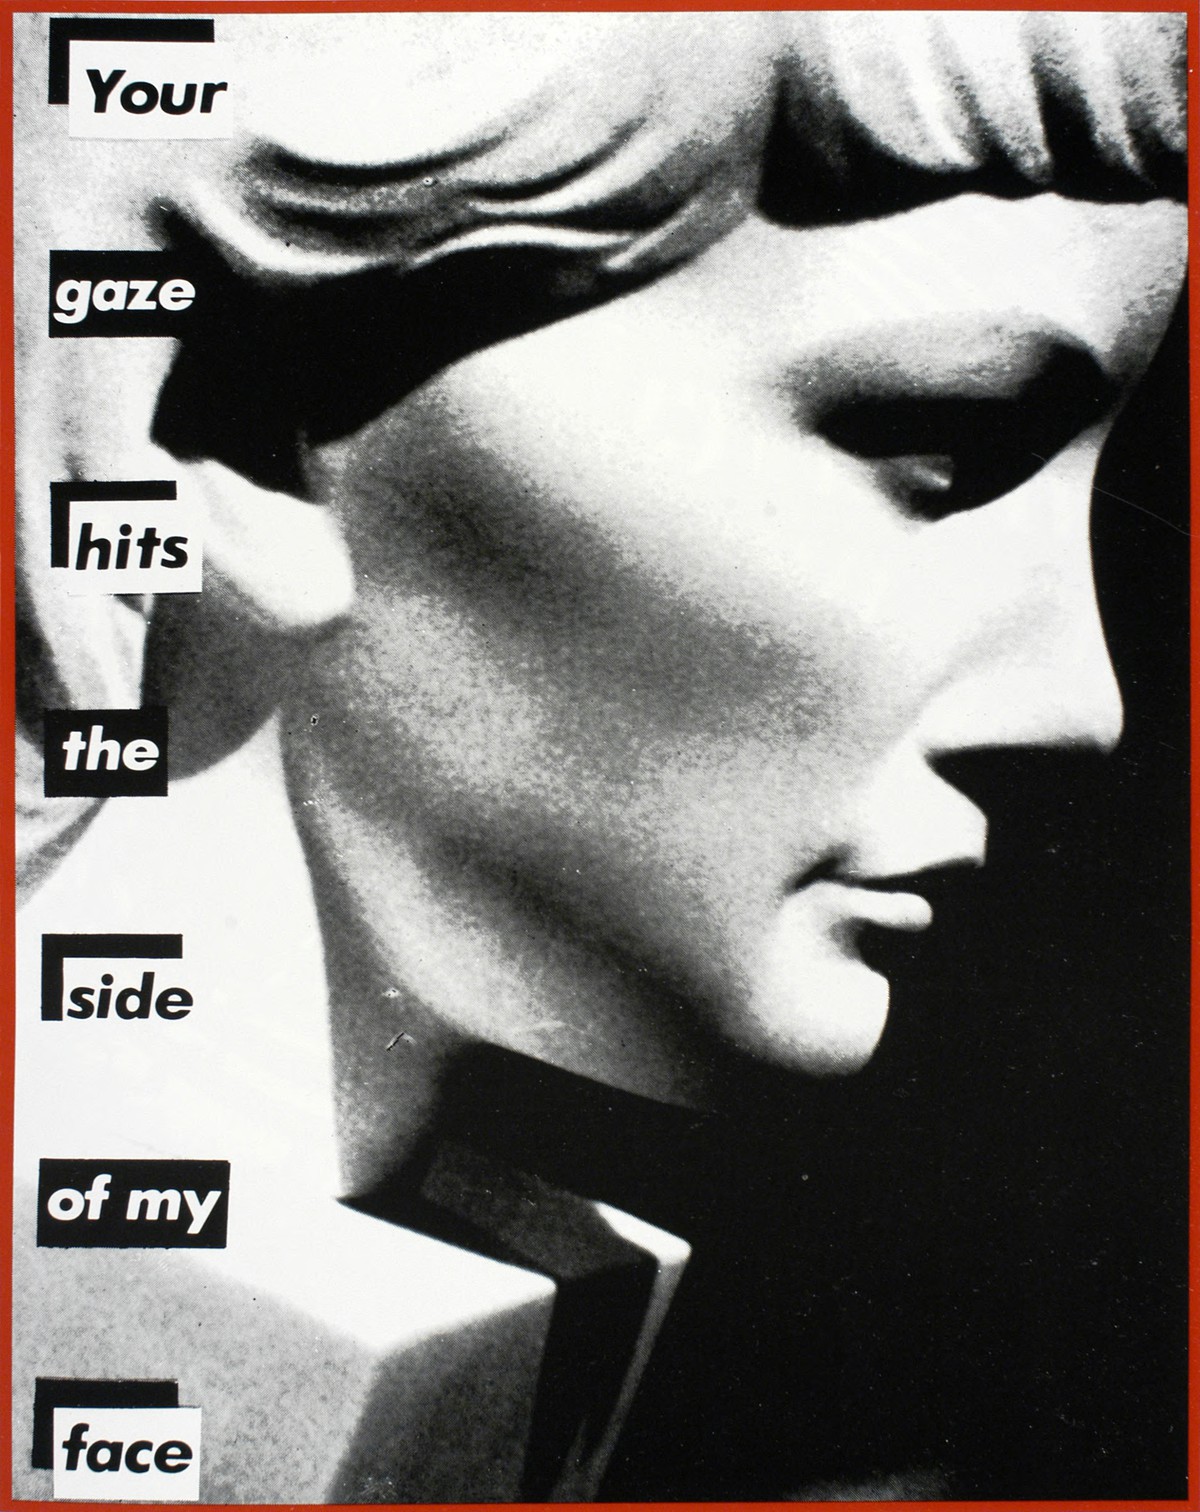 Barbara Kruger, Untitled (Your gaze hits the side of my face), 1981